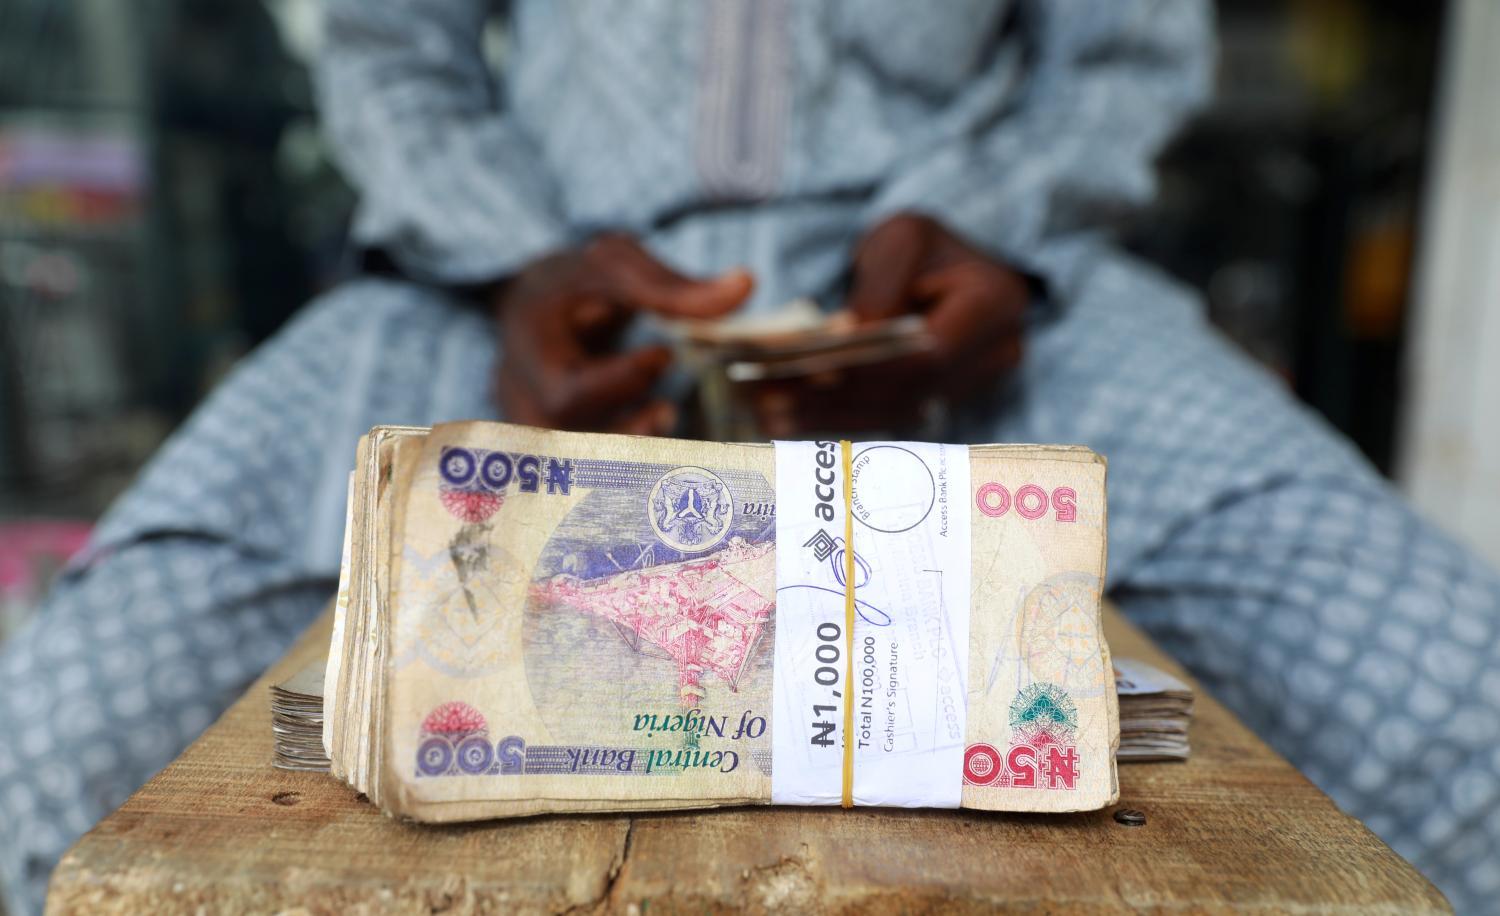 FILE PHOTO: A money changer counts Nigerian currency notes for a customer in Nigeria's commercial capital, Lagos, Nigeria March 16, 2020. REUTERS/Temilade Adelaja/File Photo